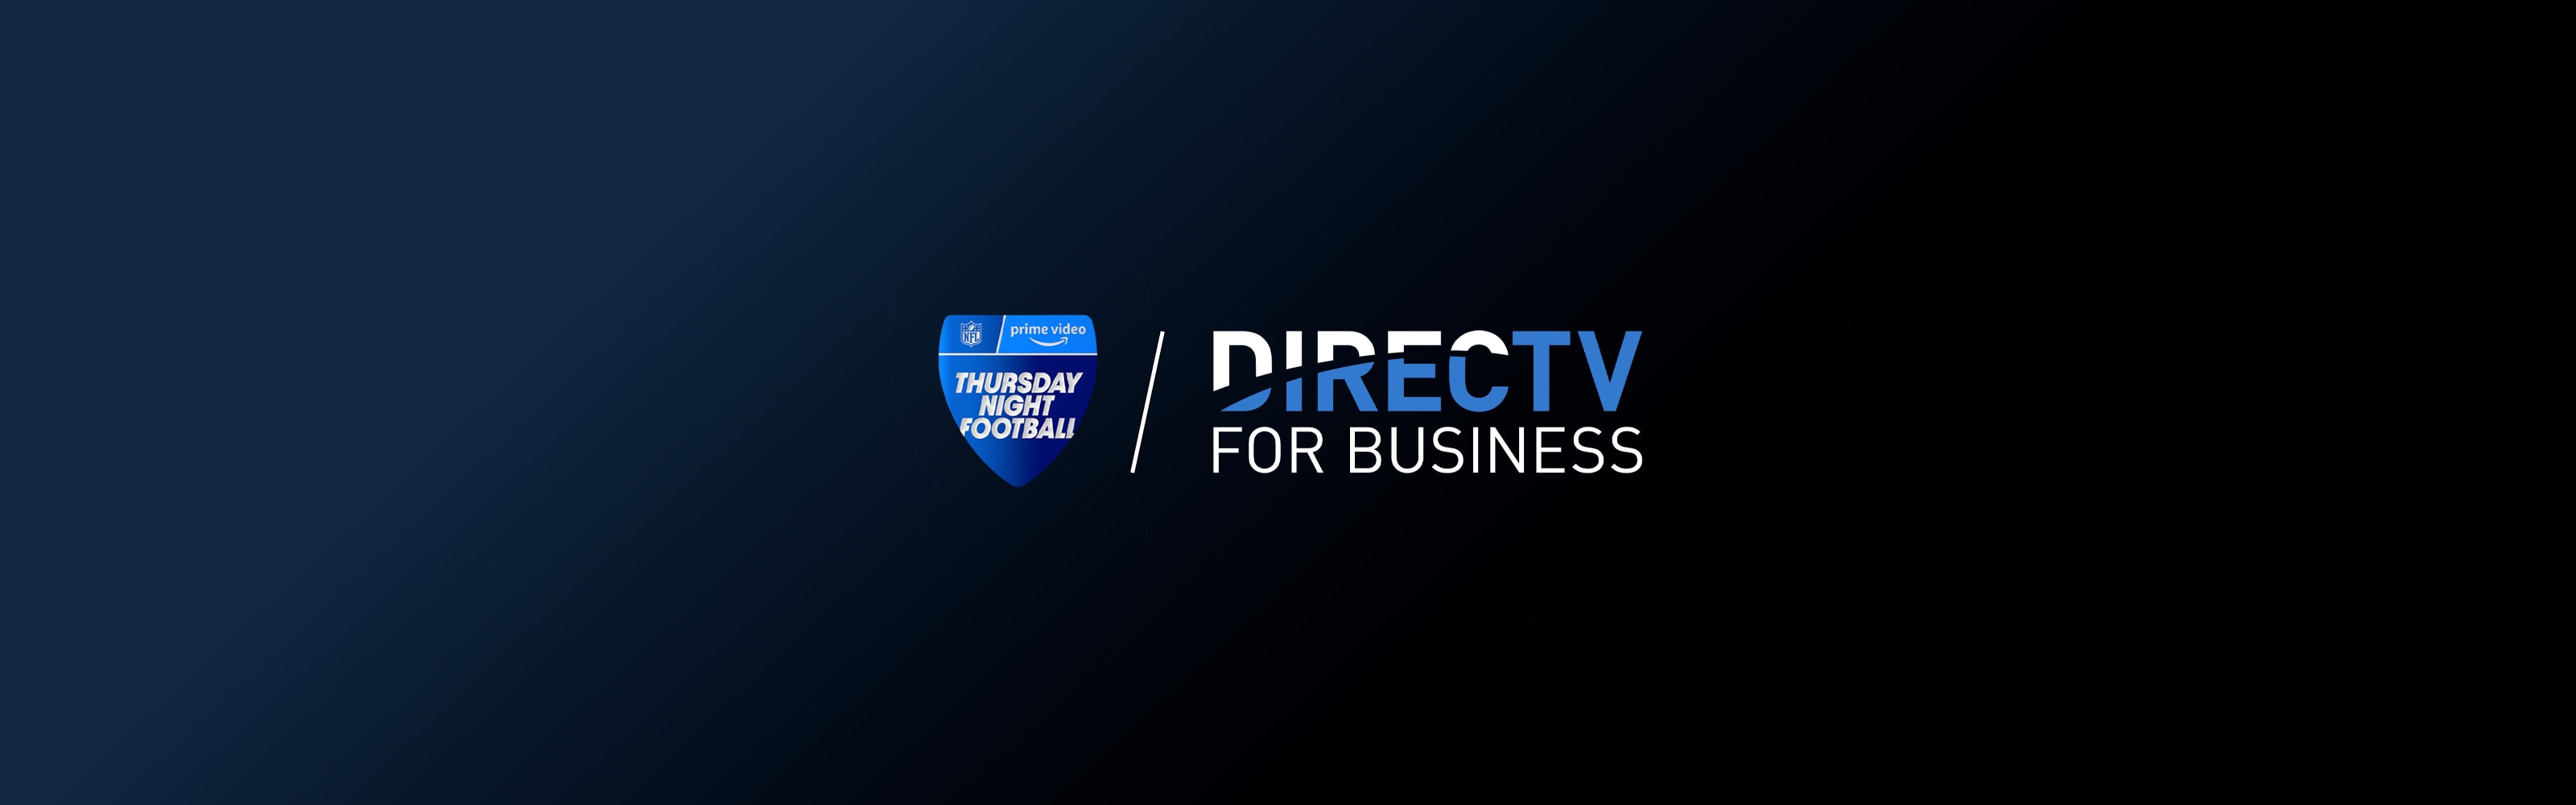 what channel is football on tonight on directv